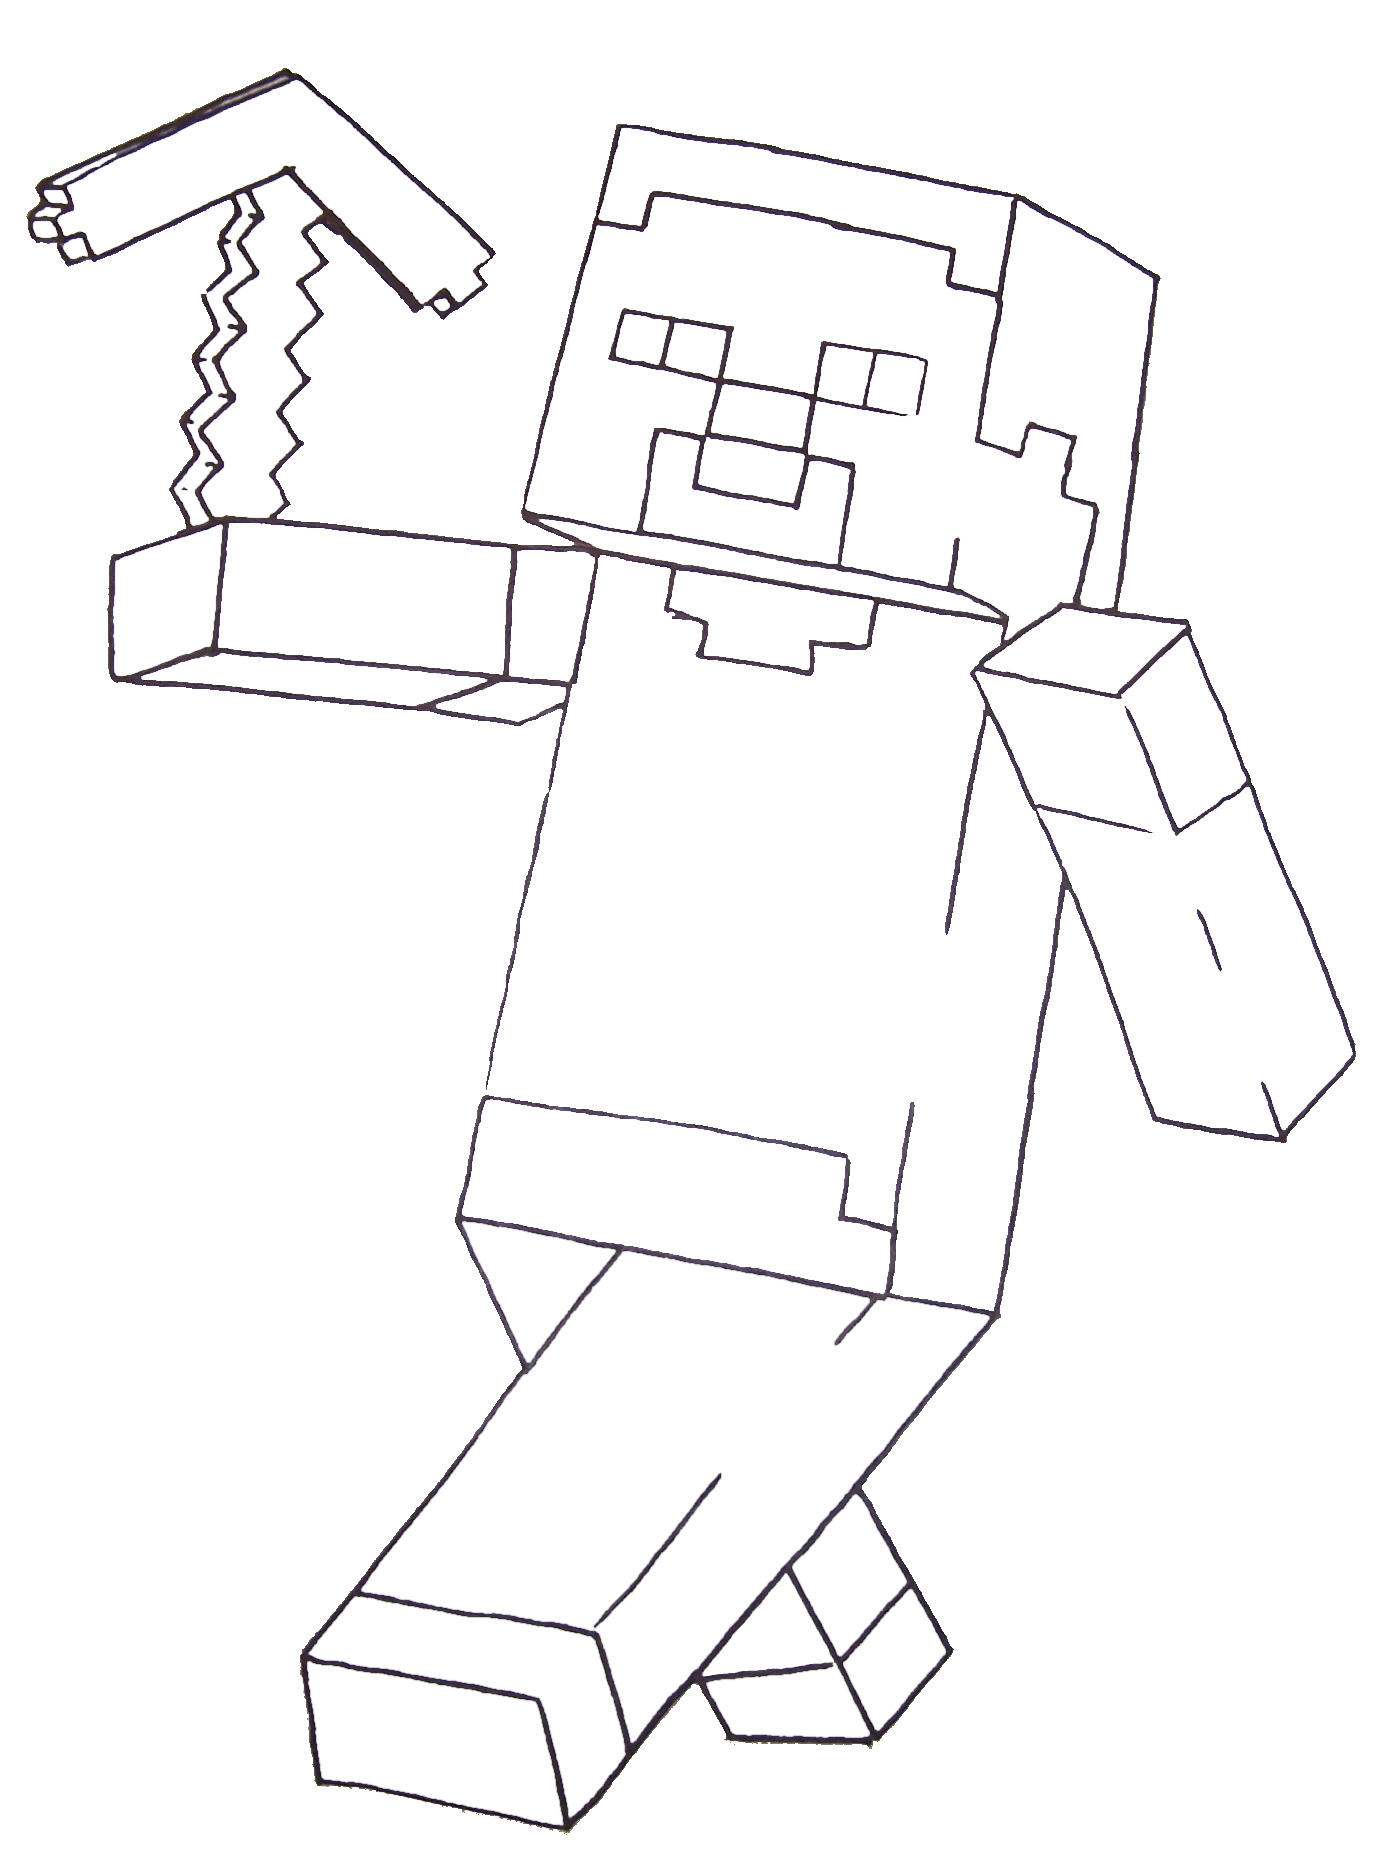 Fun Free Printable Coloring Pages for Boys: Including Minecraft - Adventures of Kids Creative Chaos